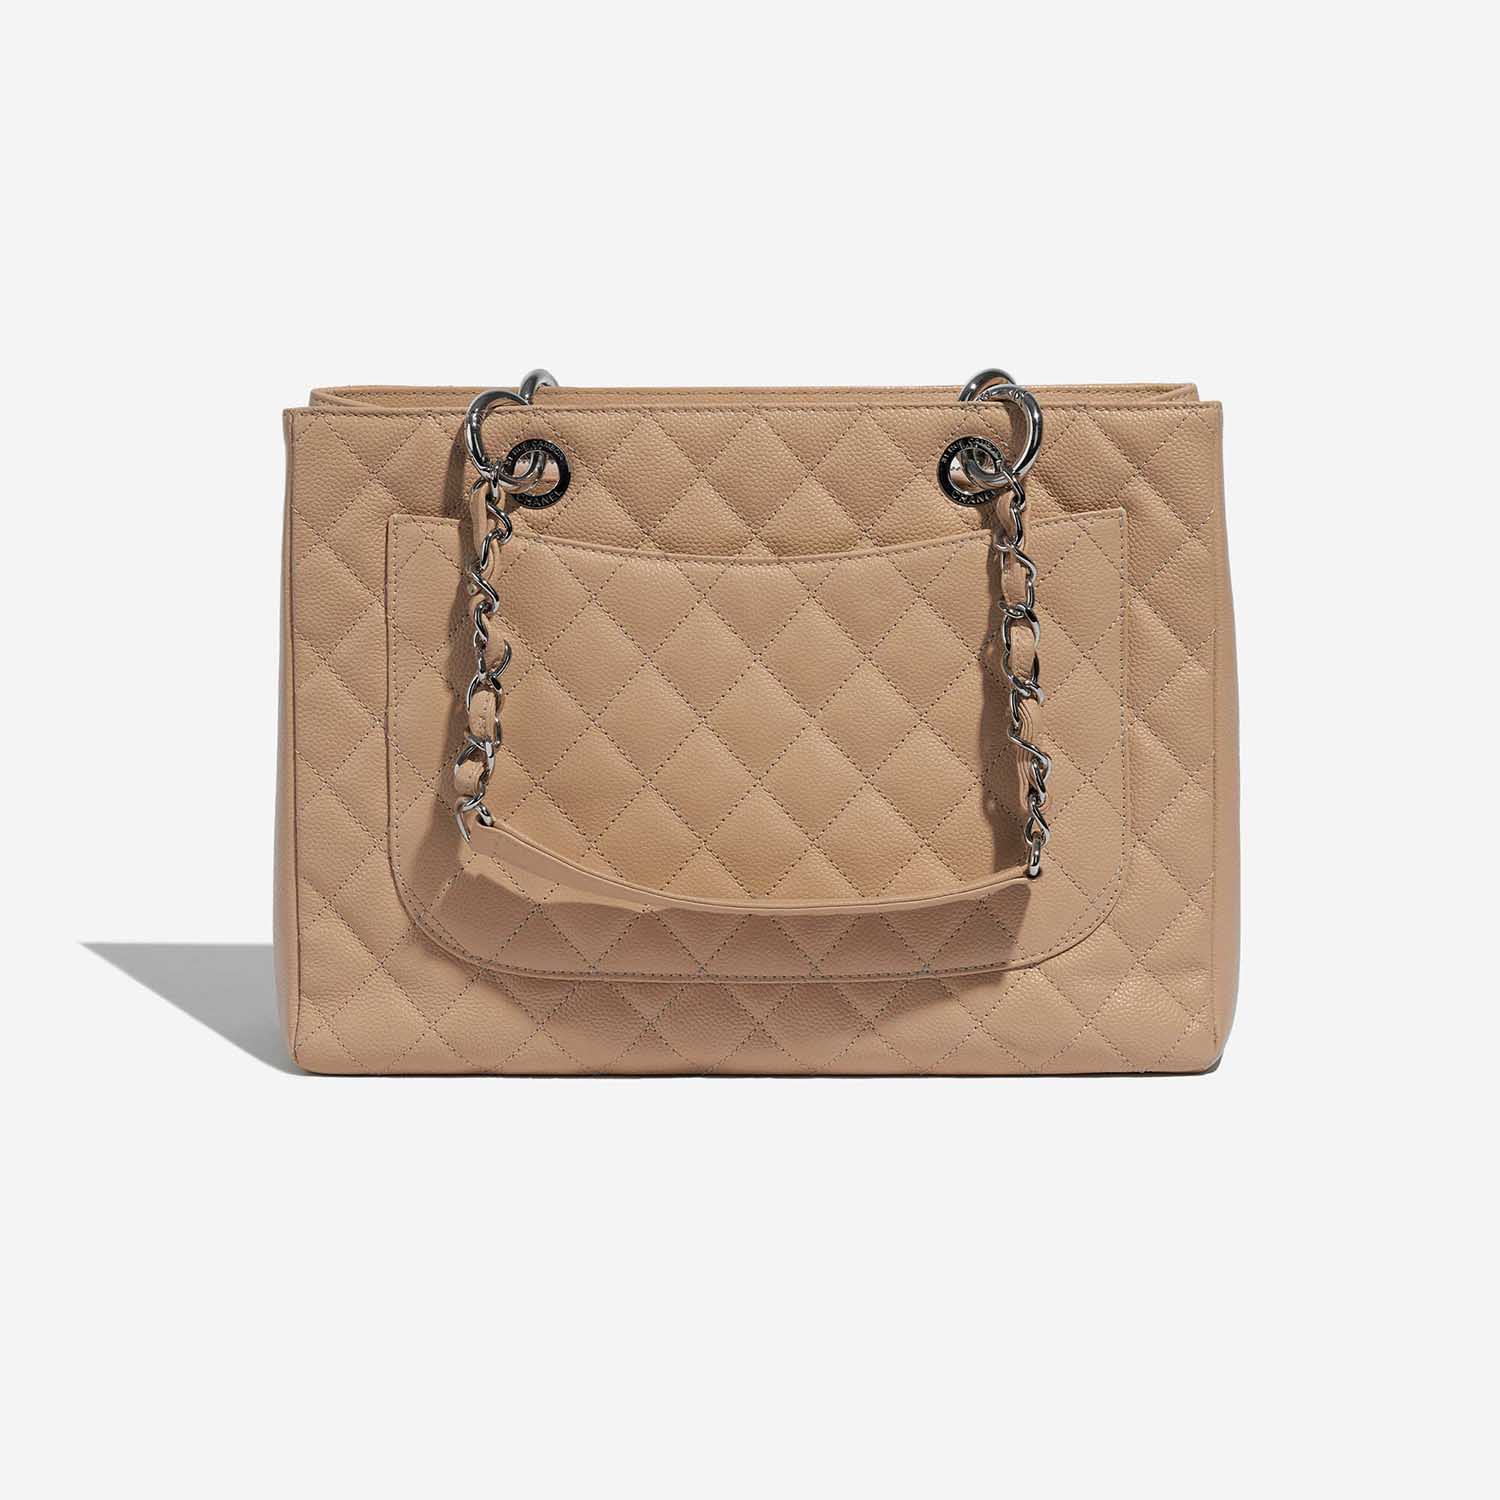 Pre-owned Chanel bag Shopping Tote GST Caviar Beige Beige Back | Sell your designer bag on Saclab.com